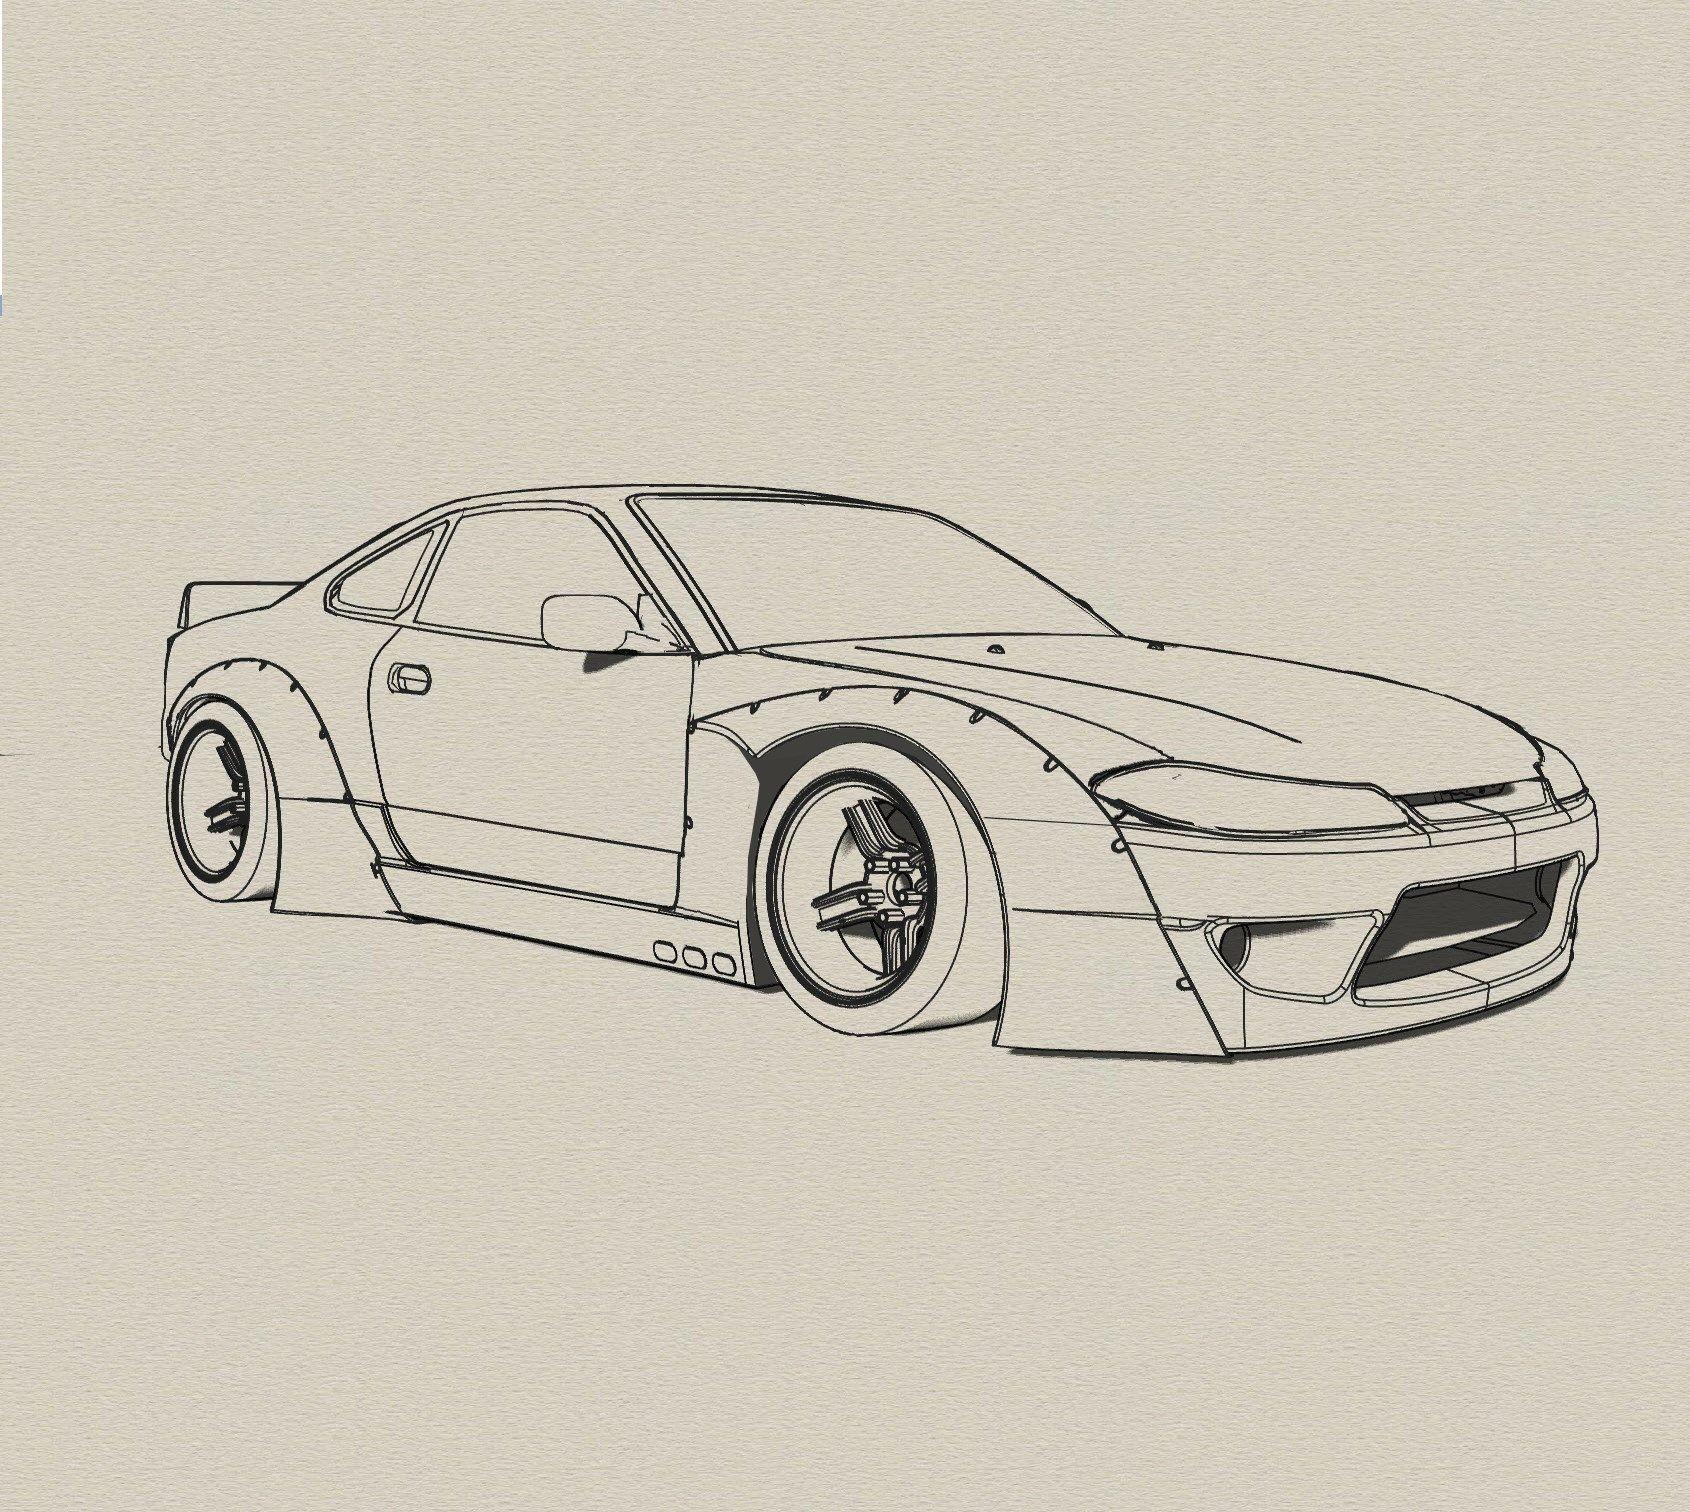 Drift Car Drawing Image - That Cham Online